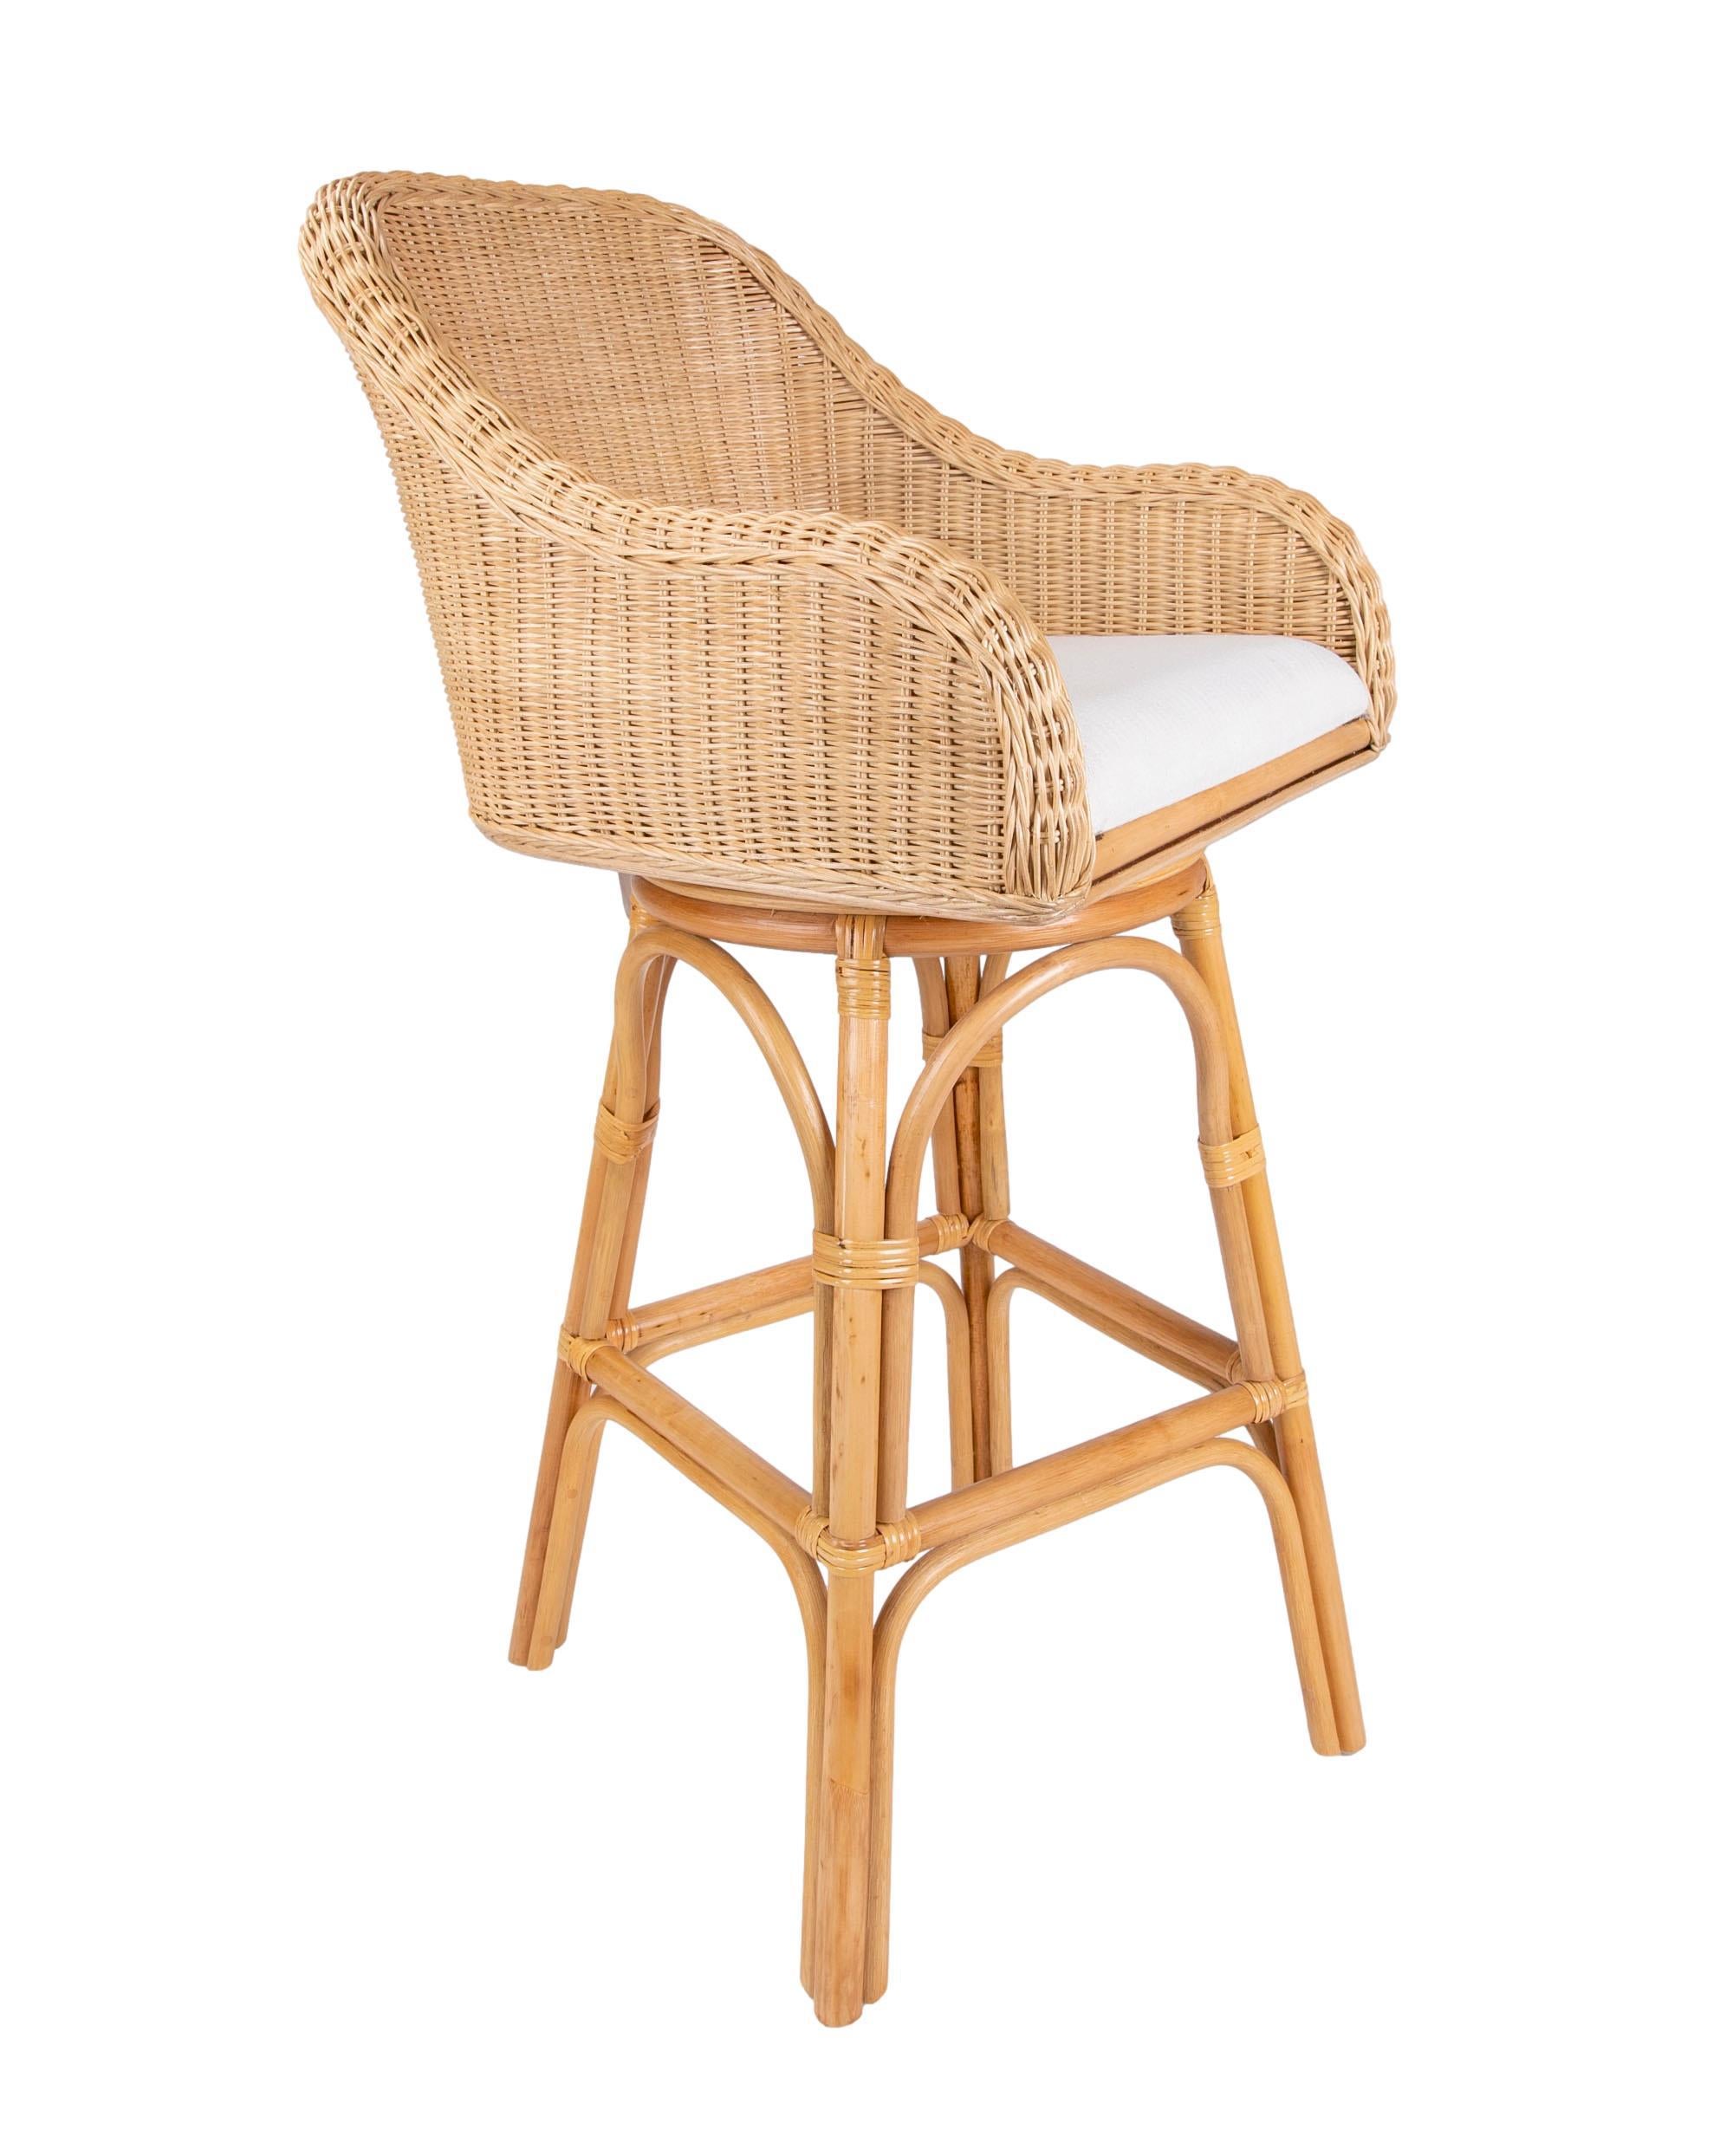 European Upholstered Rattan and Wicker Bar stool with Sideways Movement